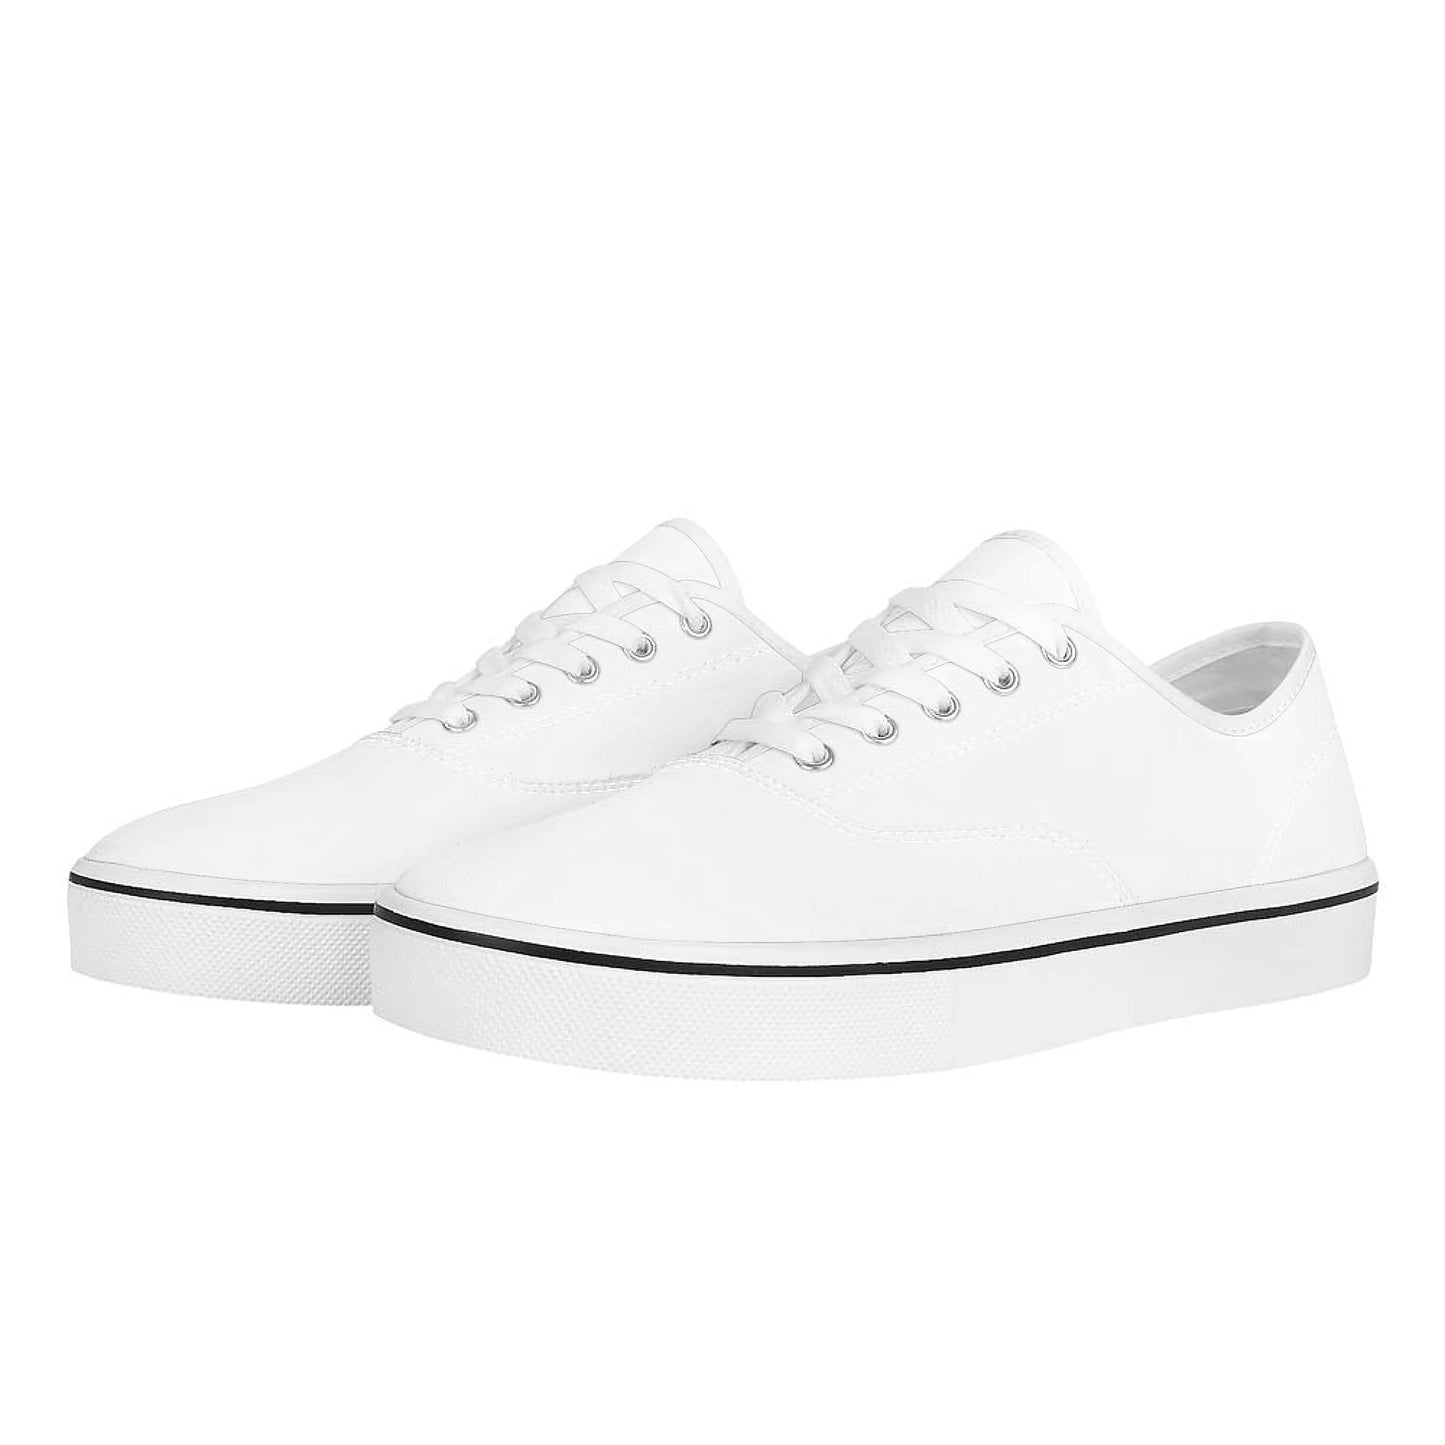 Create Your Own - Skate Shoe - White